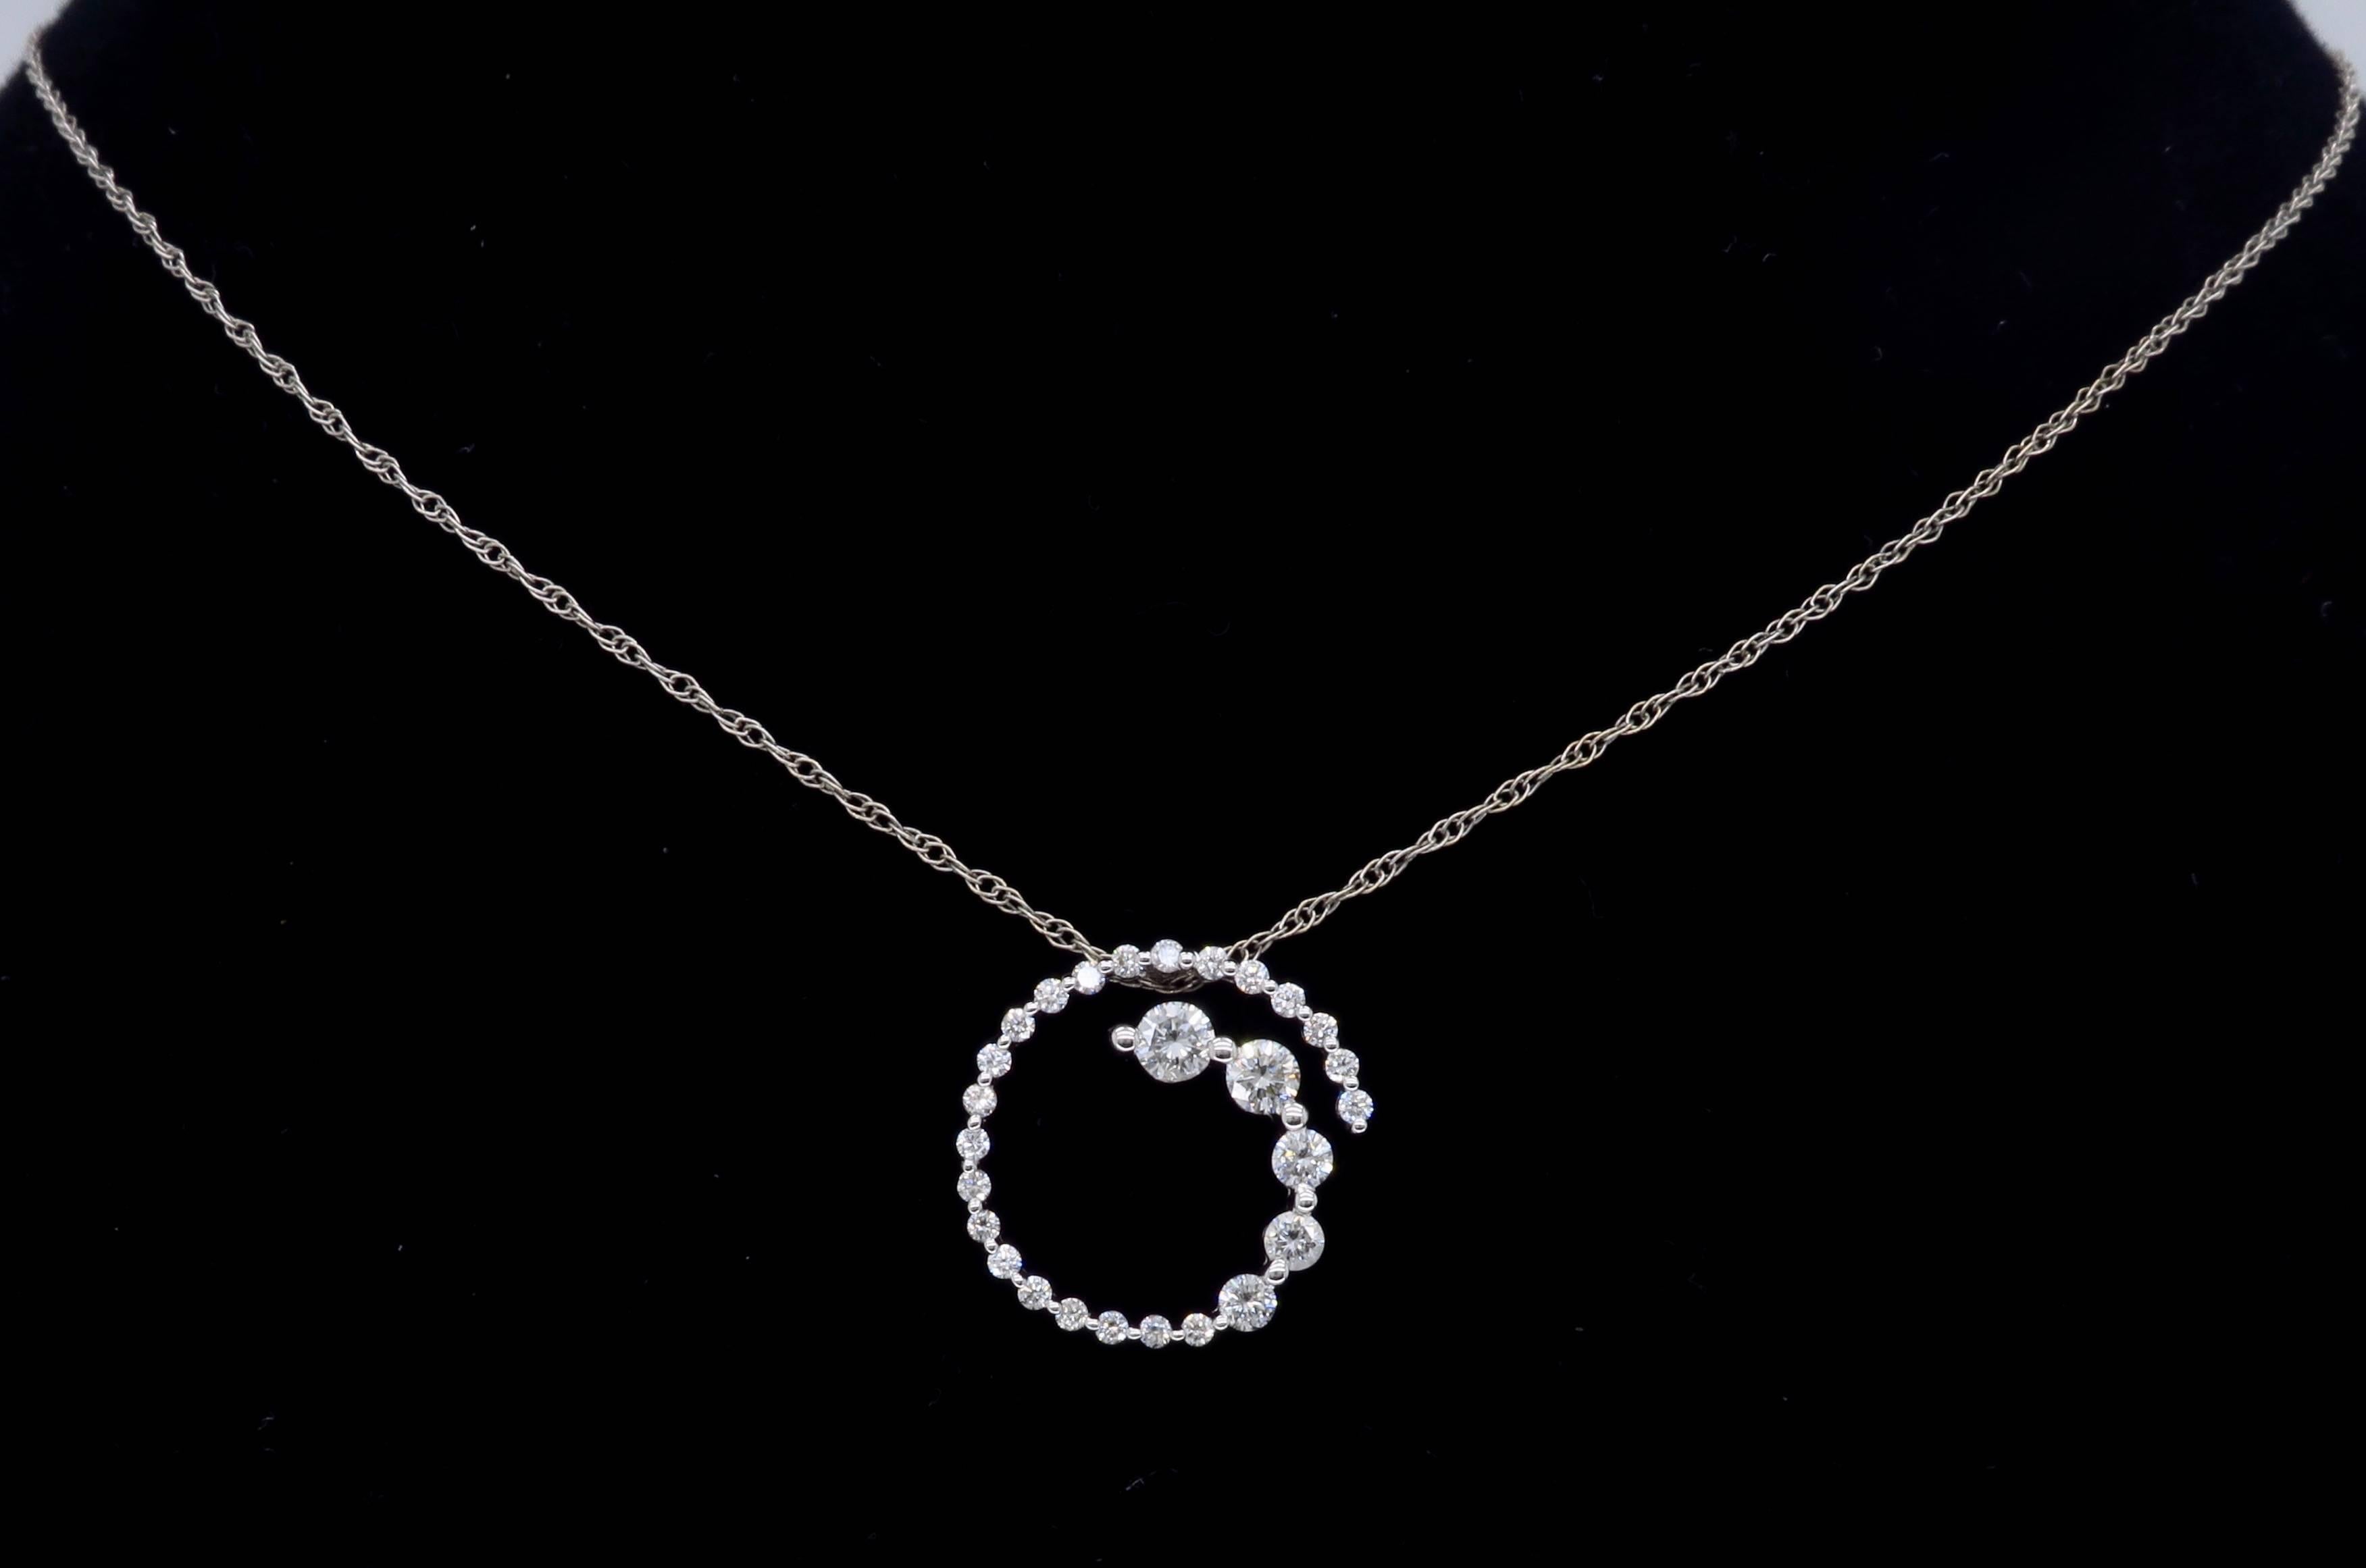 This petite swirl necklace features a 14K White Gold Diamond spiral design pendant. There are 27 Round Brilliant Cut Diamonds in the beautiful pendant. The Diamonds display VS-SI clarity and G-H color. This stunning pendant houses approximately